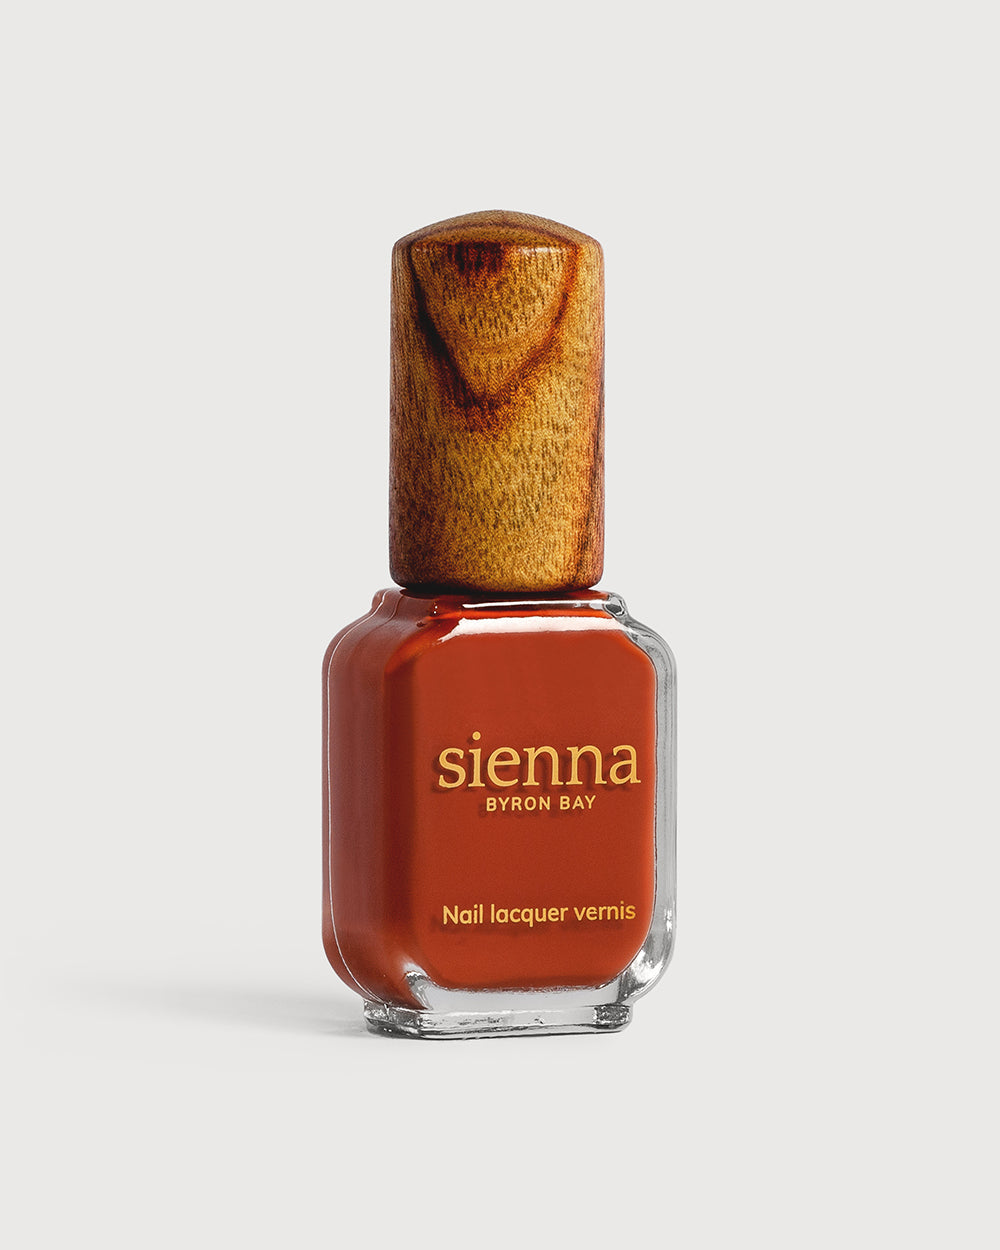 Deep terracotta nail polish glass bottle with timber cap